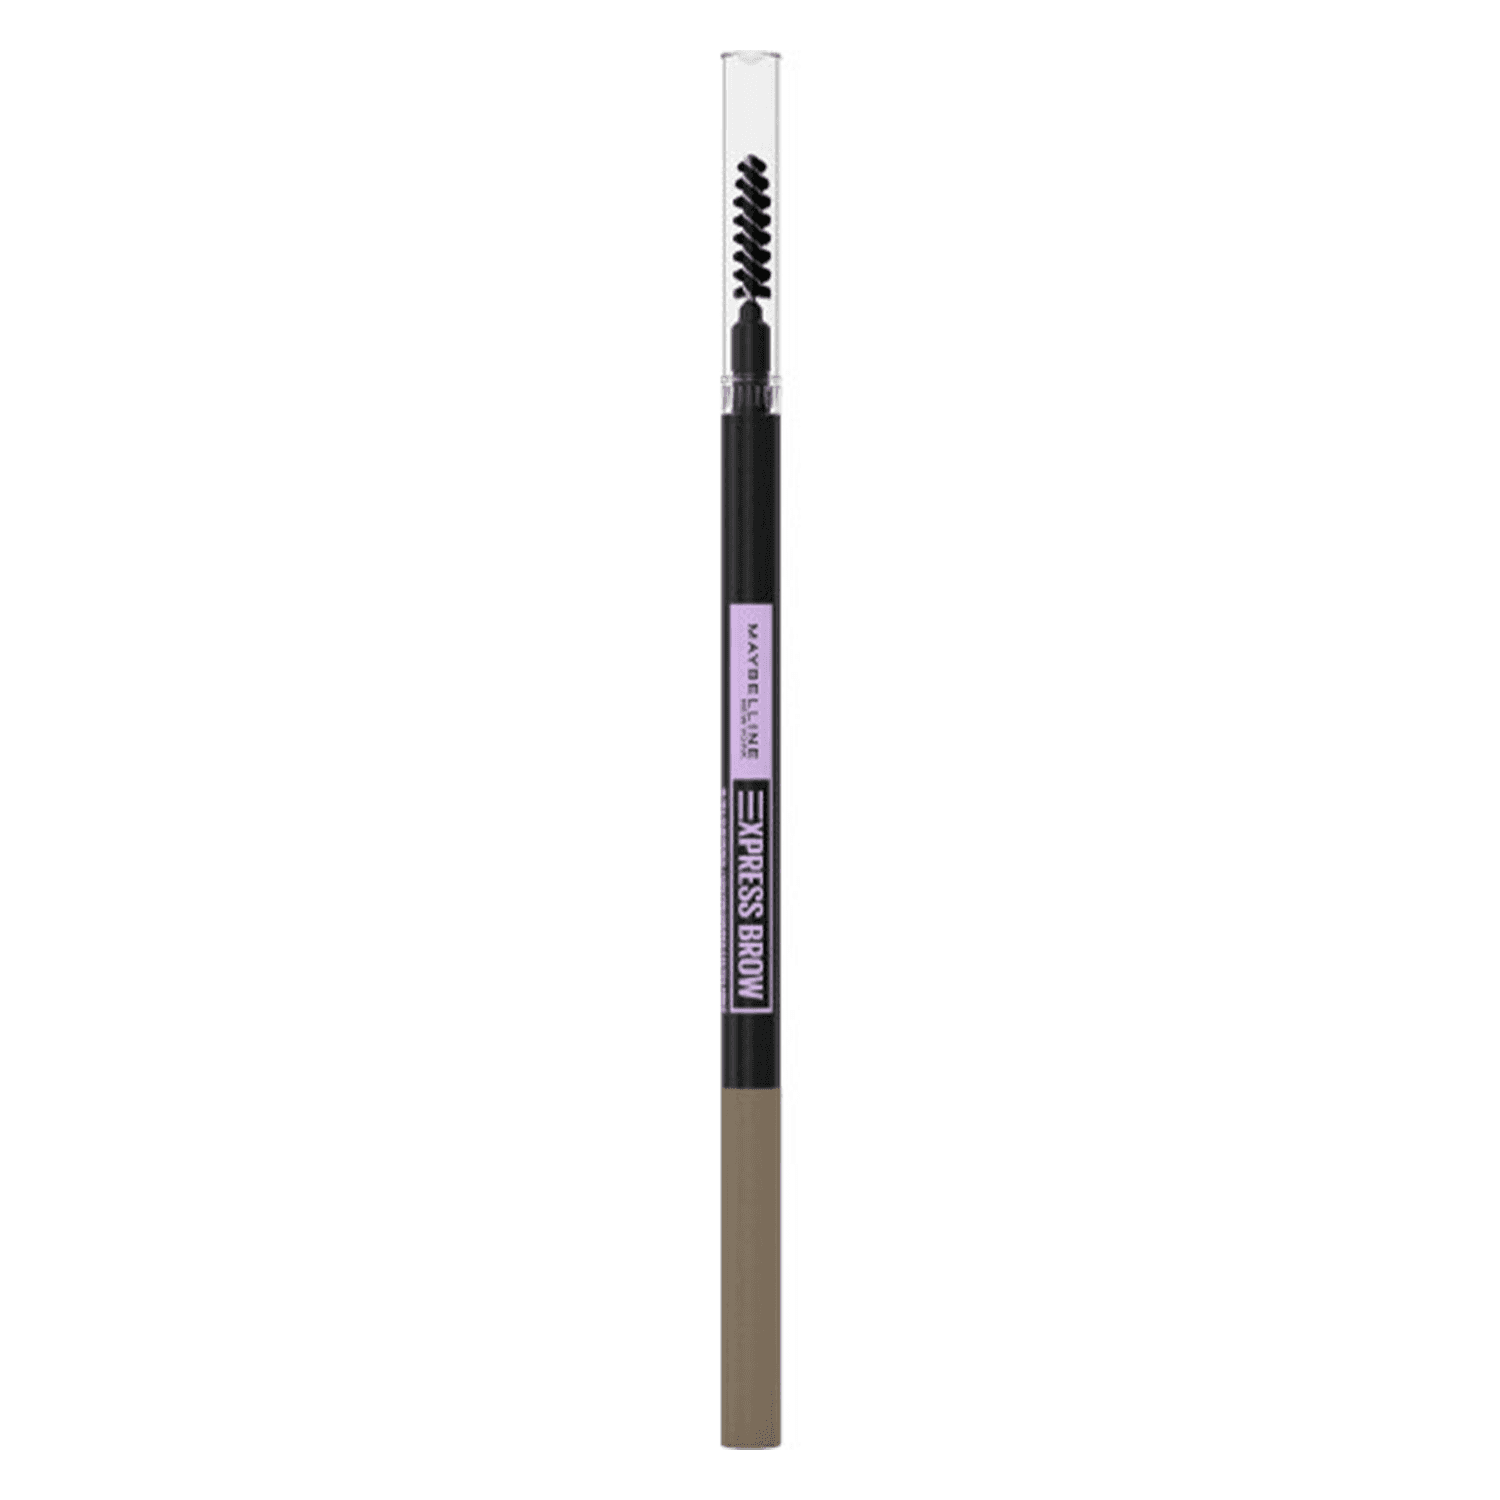 Maybelline NY Brows - Express Brow Ultra Slim Pencil Nr. 01 Blonde